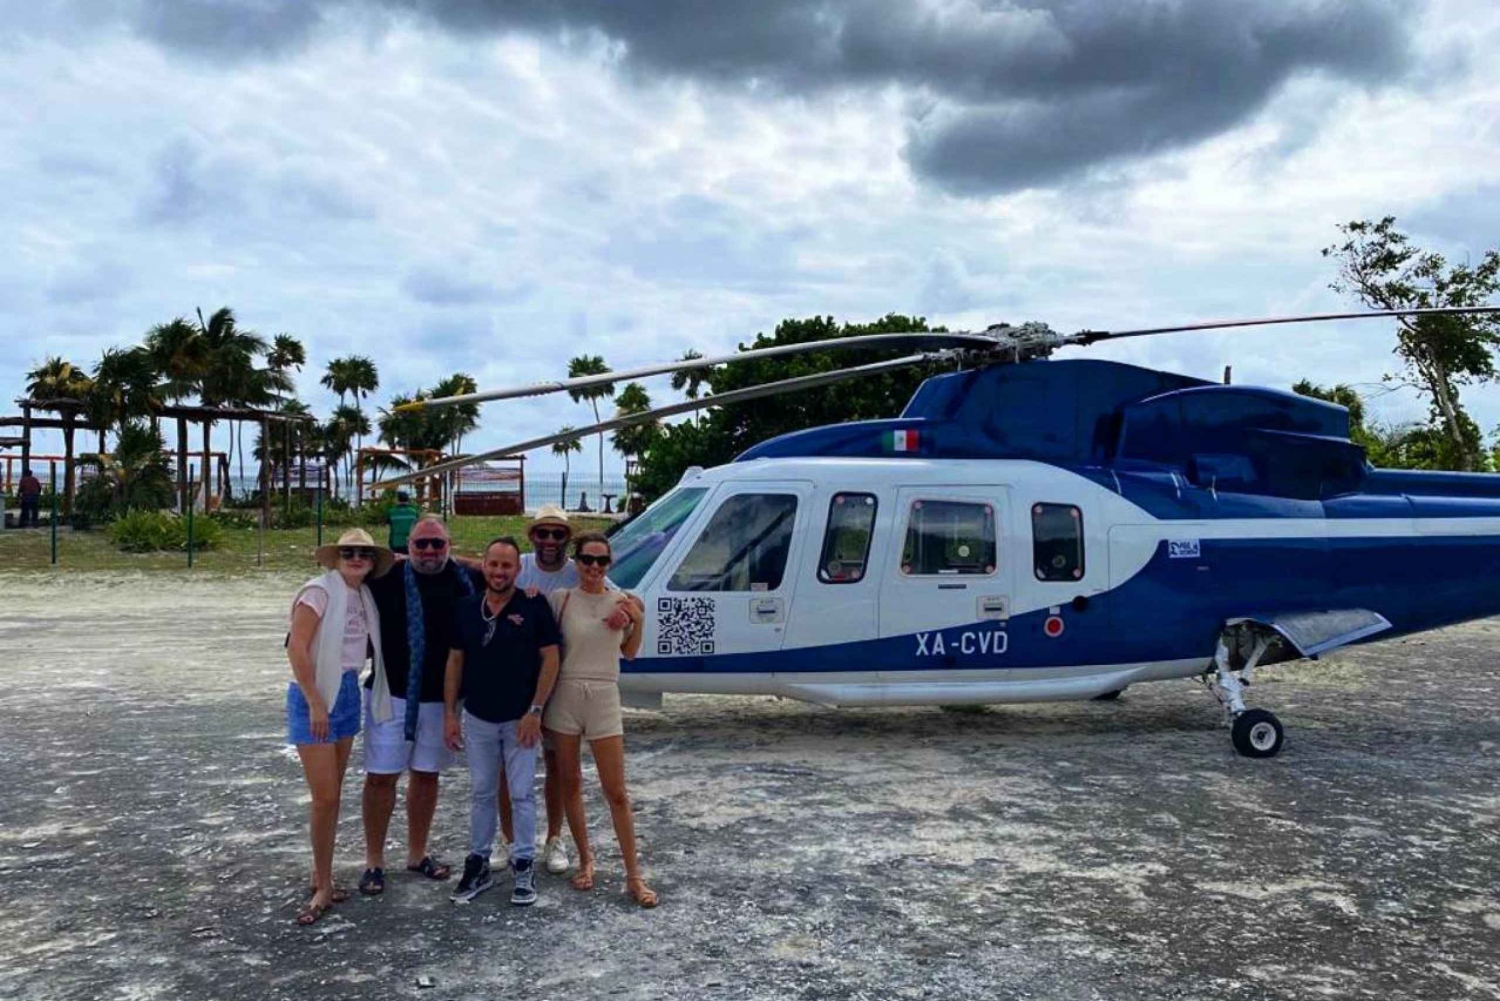 Playa Del Carmen: 15-Minute Panoramic Helicopter Tour